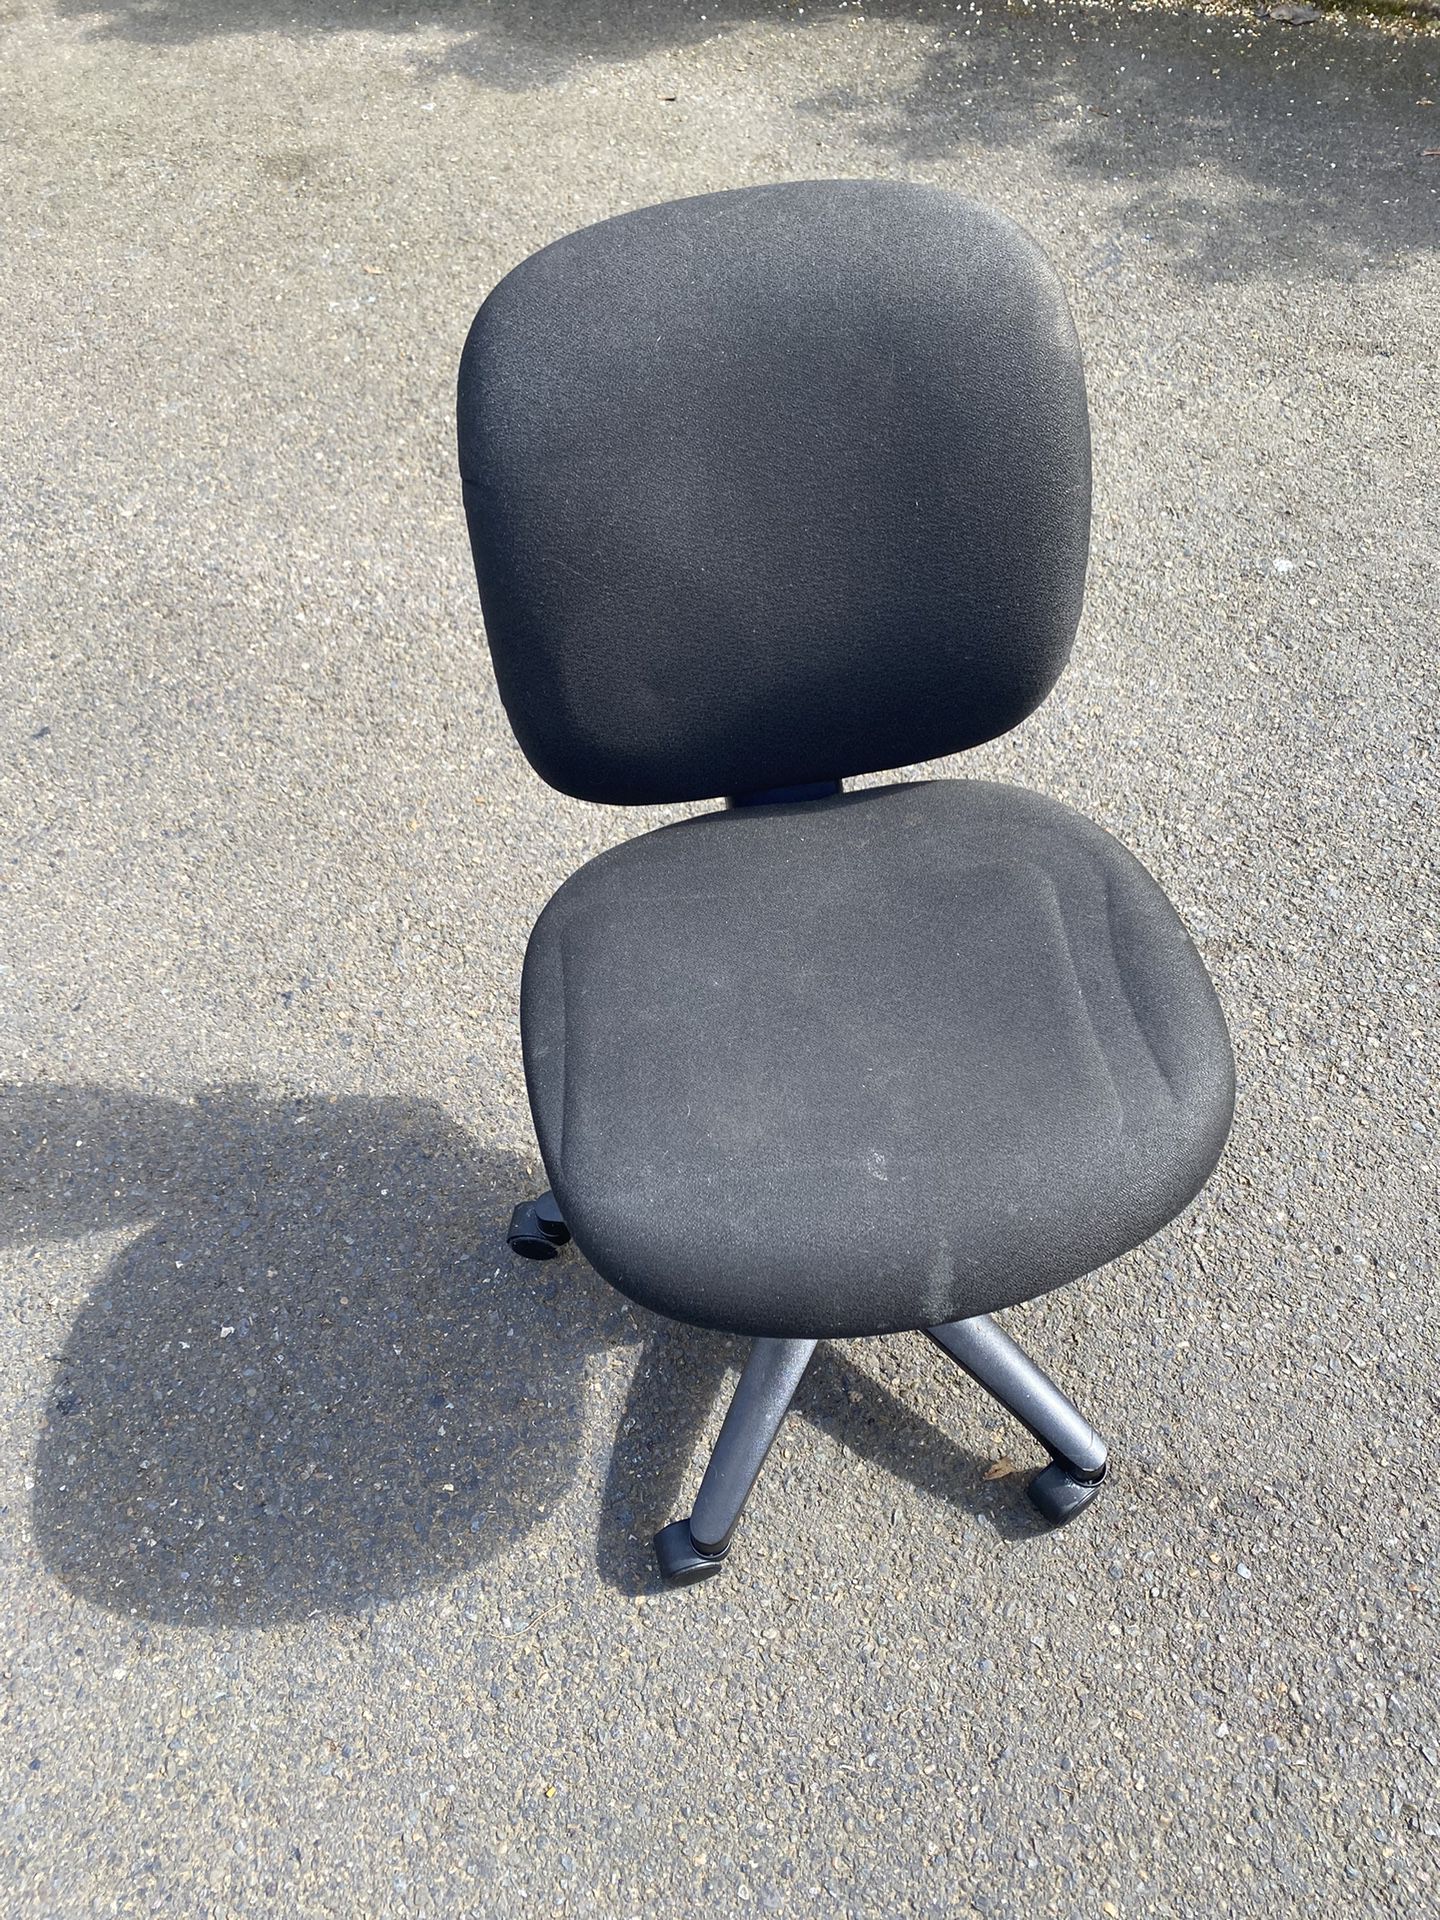 Used Office Chair $20 Or Best Offer